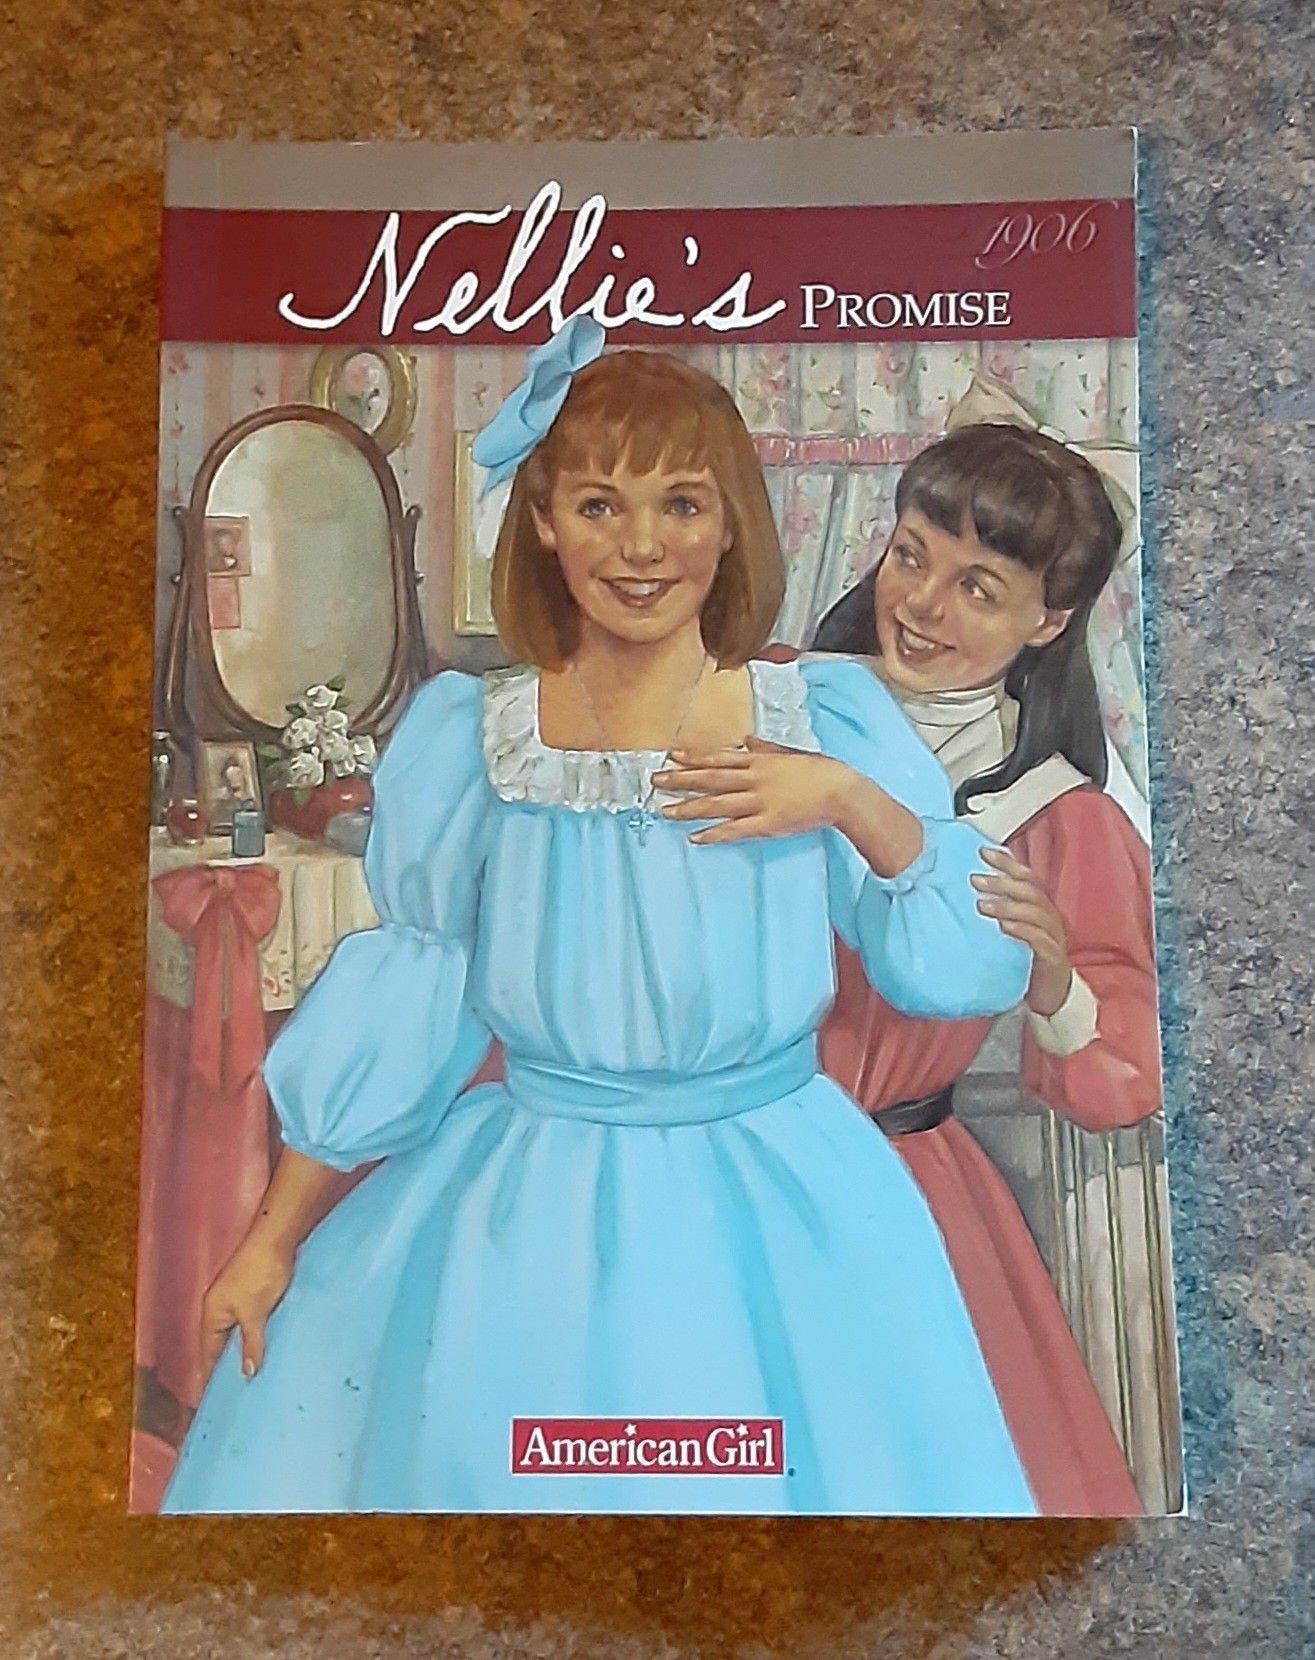 American Girl "Nellie's Promise" Children's Softcover Book - VGC